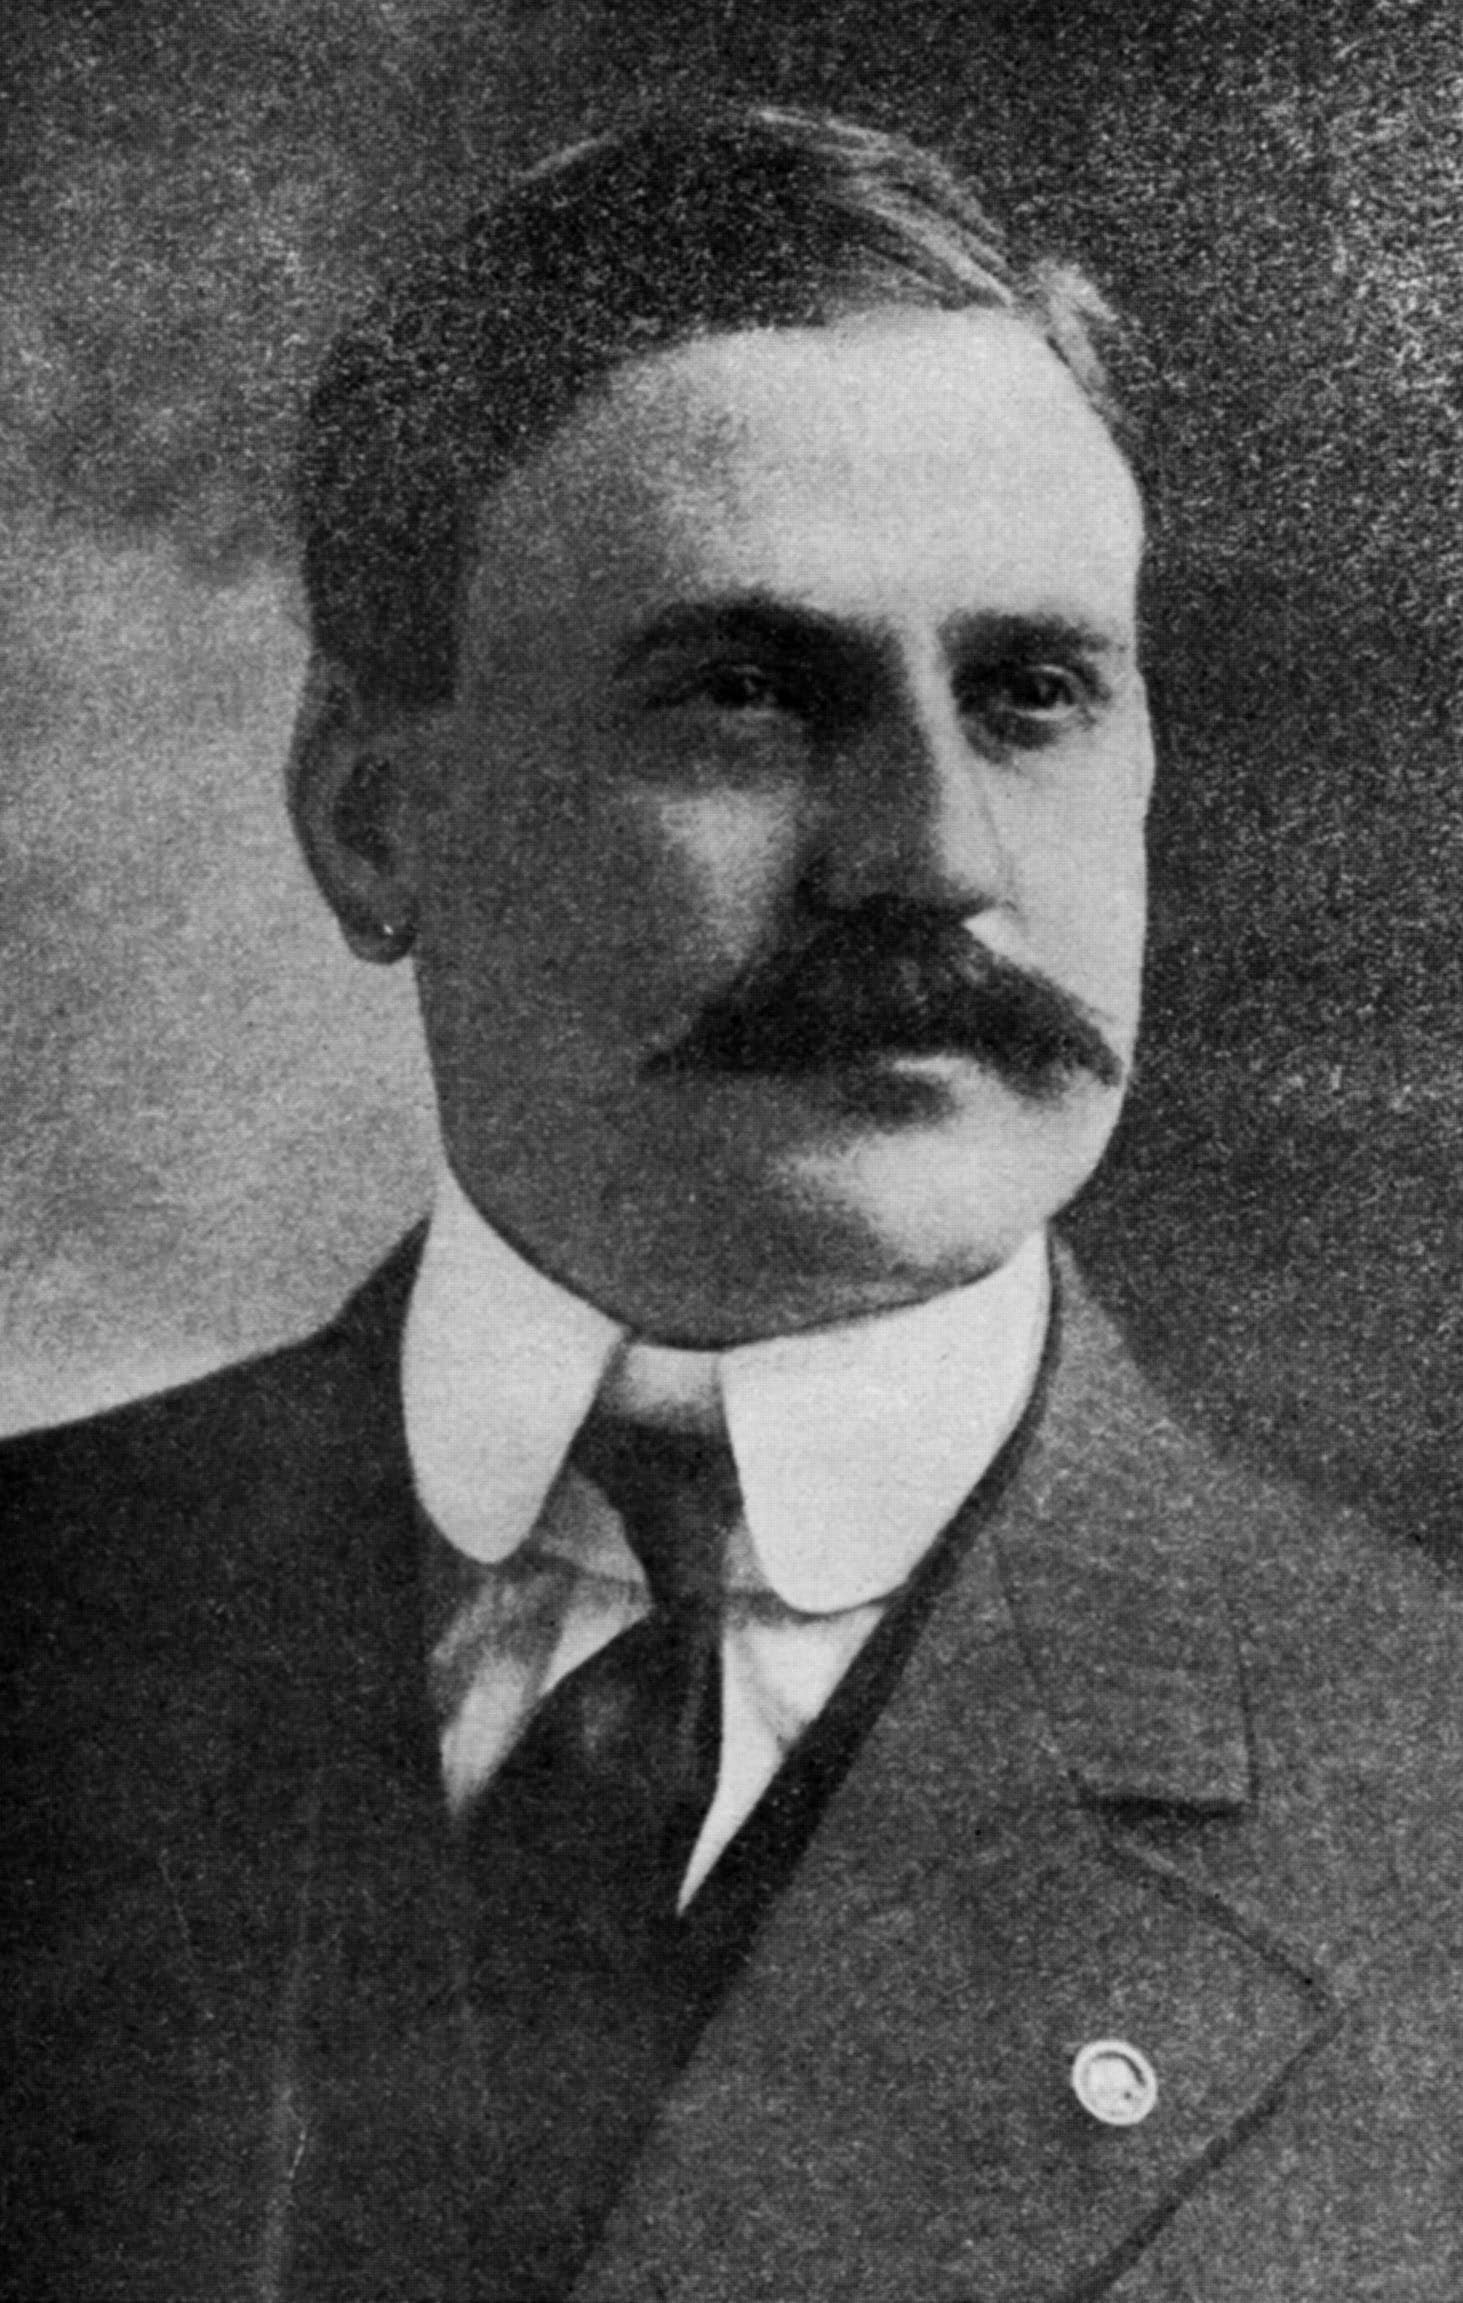 LV Ray in 1920